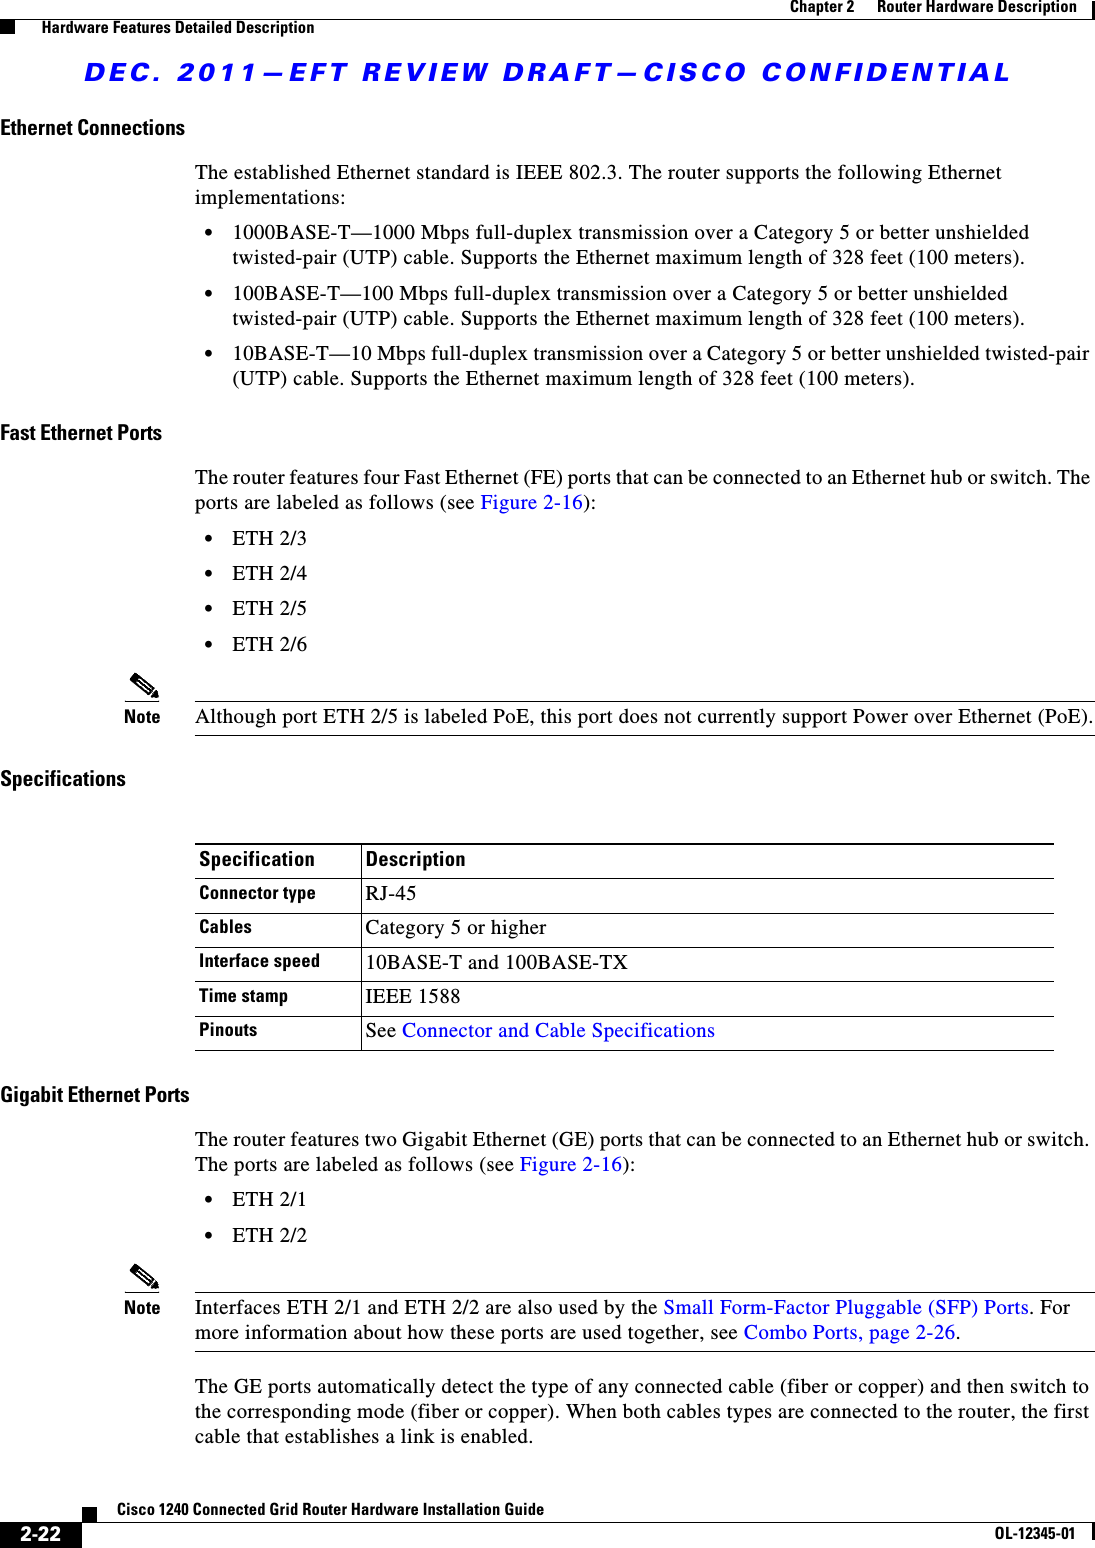 DEC. 2011—EFT REVIEW DRAFT—CISCO CONFIDENTIAL2-22Cisco 1240 Connected Grid Router Hardware Installation GuideOL-12345-01Chapter 2      Router Hardware Description  Hardware Features Detailed DescriptionEthernet ConnectionsThe established Ethernet standard is IEEE 802.3. The router supports the following Ethernet implementations:  • 1000BASE-T—1000 Mbps full-duplex transmission over a Category 5 or better unshielded twisted-pair (UTP) cable. Supports the Ethernet maximum length of 328 feet (100 meters).  • 100BASE-T—100 Mbps full-duplex transmission over a Category 5 or better unshielded twisted-pair (UTP) cable. Supports the Ethernet maximum length of 328 feet (100 meters).  • 10BASE-T—10 Mbps full-duplex transmission over a Category 5 or better unshielded twisted-pair (UTP) cable. Supports the Ethernet maximum length of 328 feet (100 meters).Fast Ethernet PortsThe router features four Fast Ethernet (FE) ports that can be connected to an Ethernet hub or switch. The ports are labeled as follows (see Figure 2-16):  • ETH 2/3  • ETH 2/4  • ETH 2/5  • ETH 2/6Note Although port ETH 2/5 is labeled PoE, this port does not currently support Power over Ethernet (PoE).SpecificationsGigabit Ethernet PortsThe router features two Gigabit Ethernet (GE) ports that can be connected to an Ethernet hub or switch. The ports are labeled as follows (see Figure 2-16):  • ETH 2/1  • ETH 2/2Note Interfaces ETH 2/1 and ETH 2/2 are also used by the Small Form-Factor Pluggable (SFP) Ports. For more information about how these ports are used together, see Combo Ports, page 2-26.The GE ports automatically detect the type of any connected cable (fiber or copper) and then switch to the corresponding mode (fiber or copper). When both cables types are connected to the router, the first cable that establishes a link is enabled. Specification DescriptionConnector type RJ-45 Cables Category 5 or higherInterface speed 10BASE-T and 100BASE-TXTime stamp IEEE 1588 Pinouts See Connector and Cable Specifications